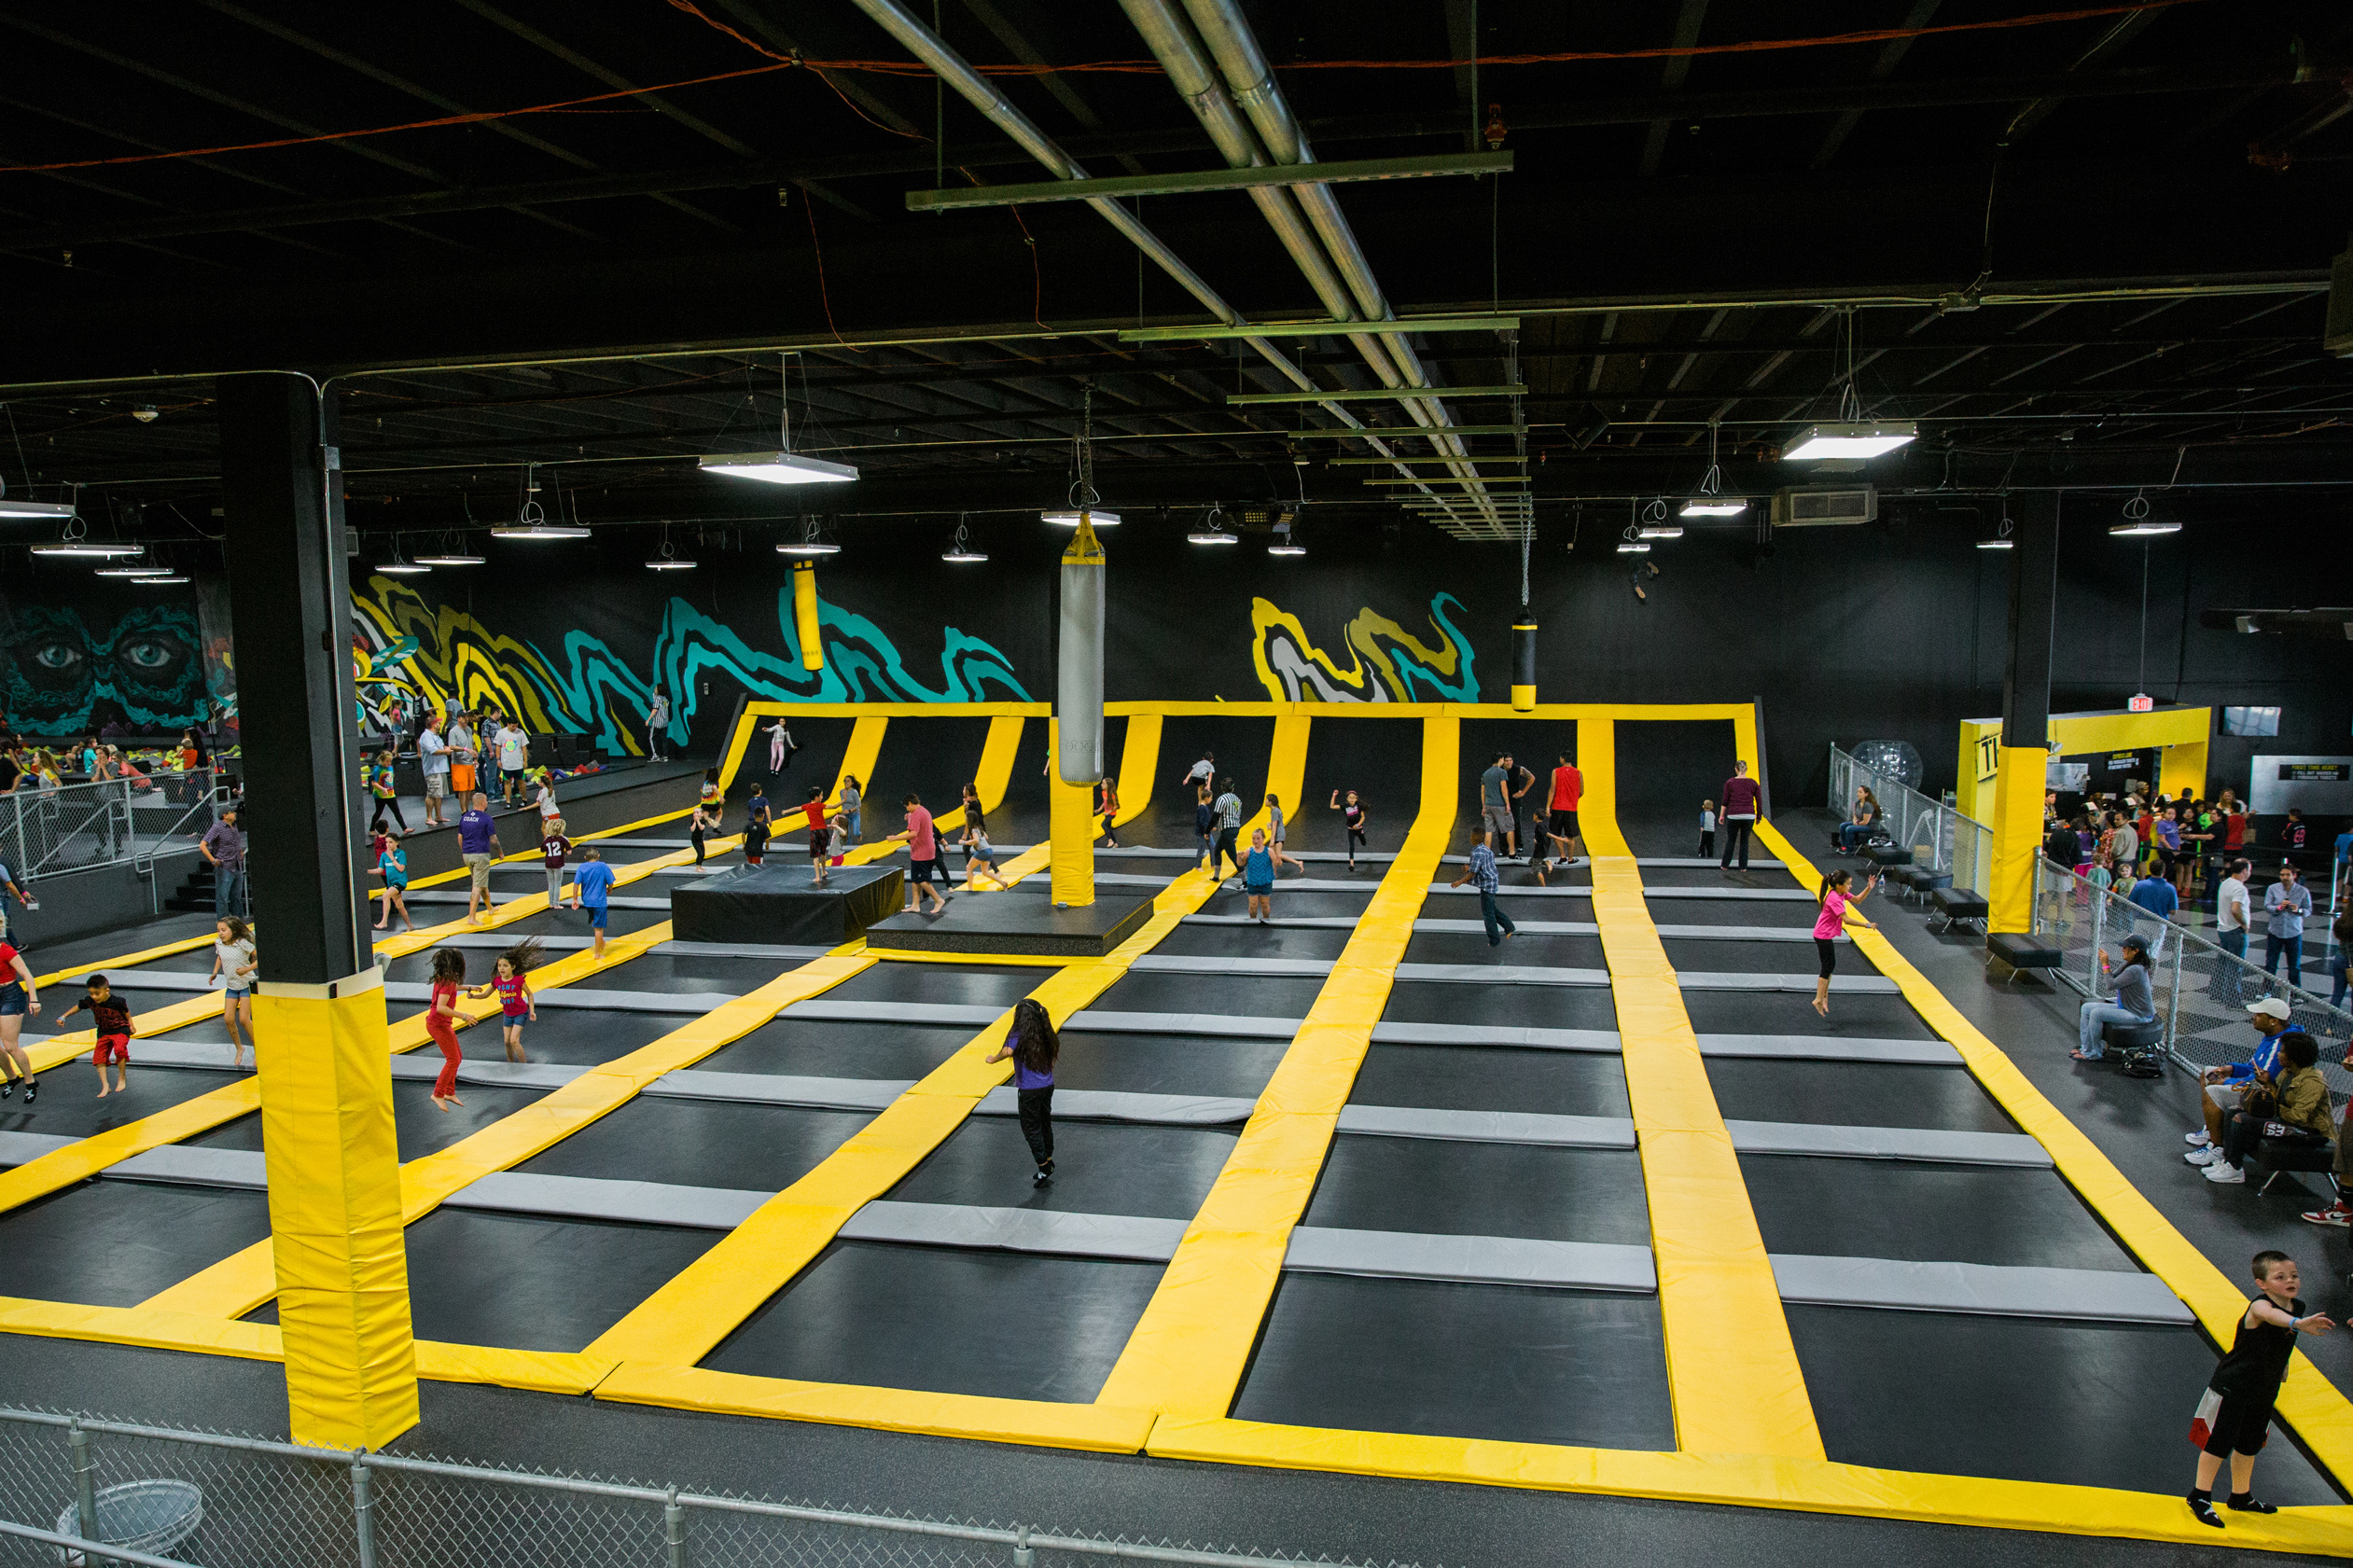 A Ryze trampoline park, one of which will soon be coming to Dundee.